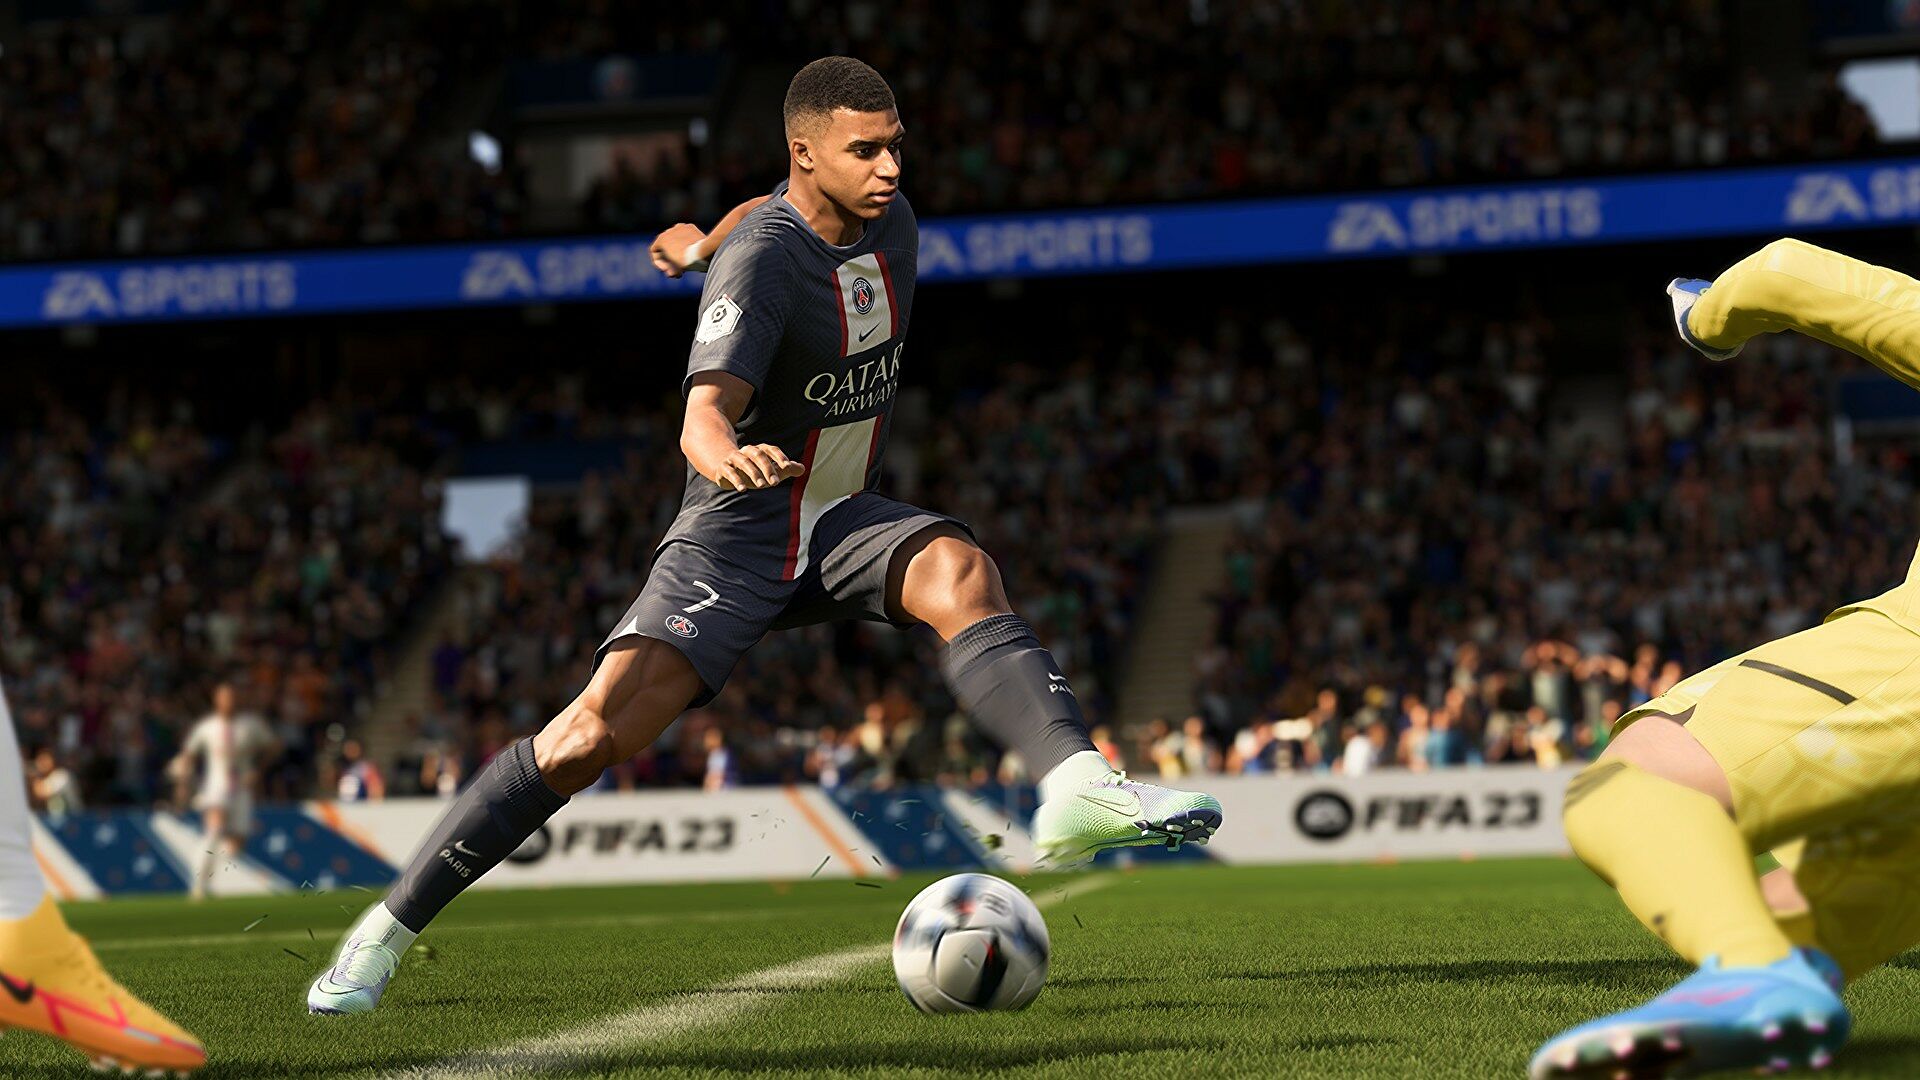 FIFA 23’s first patch is a “tuning update” aimed at penalties and dribbling